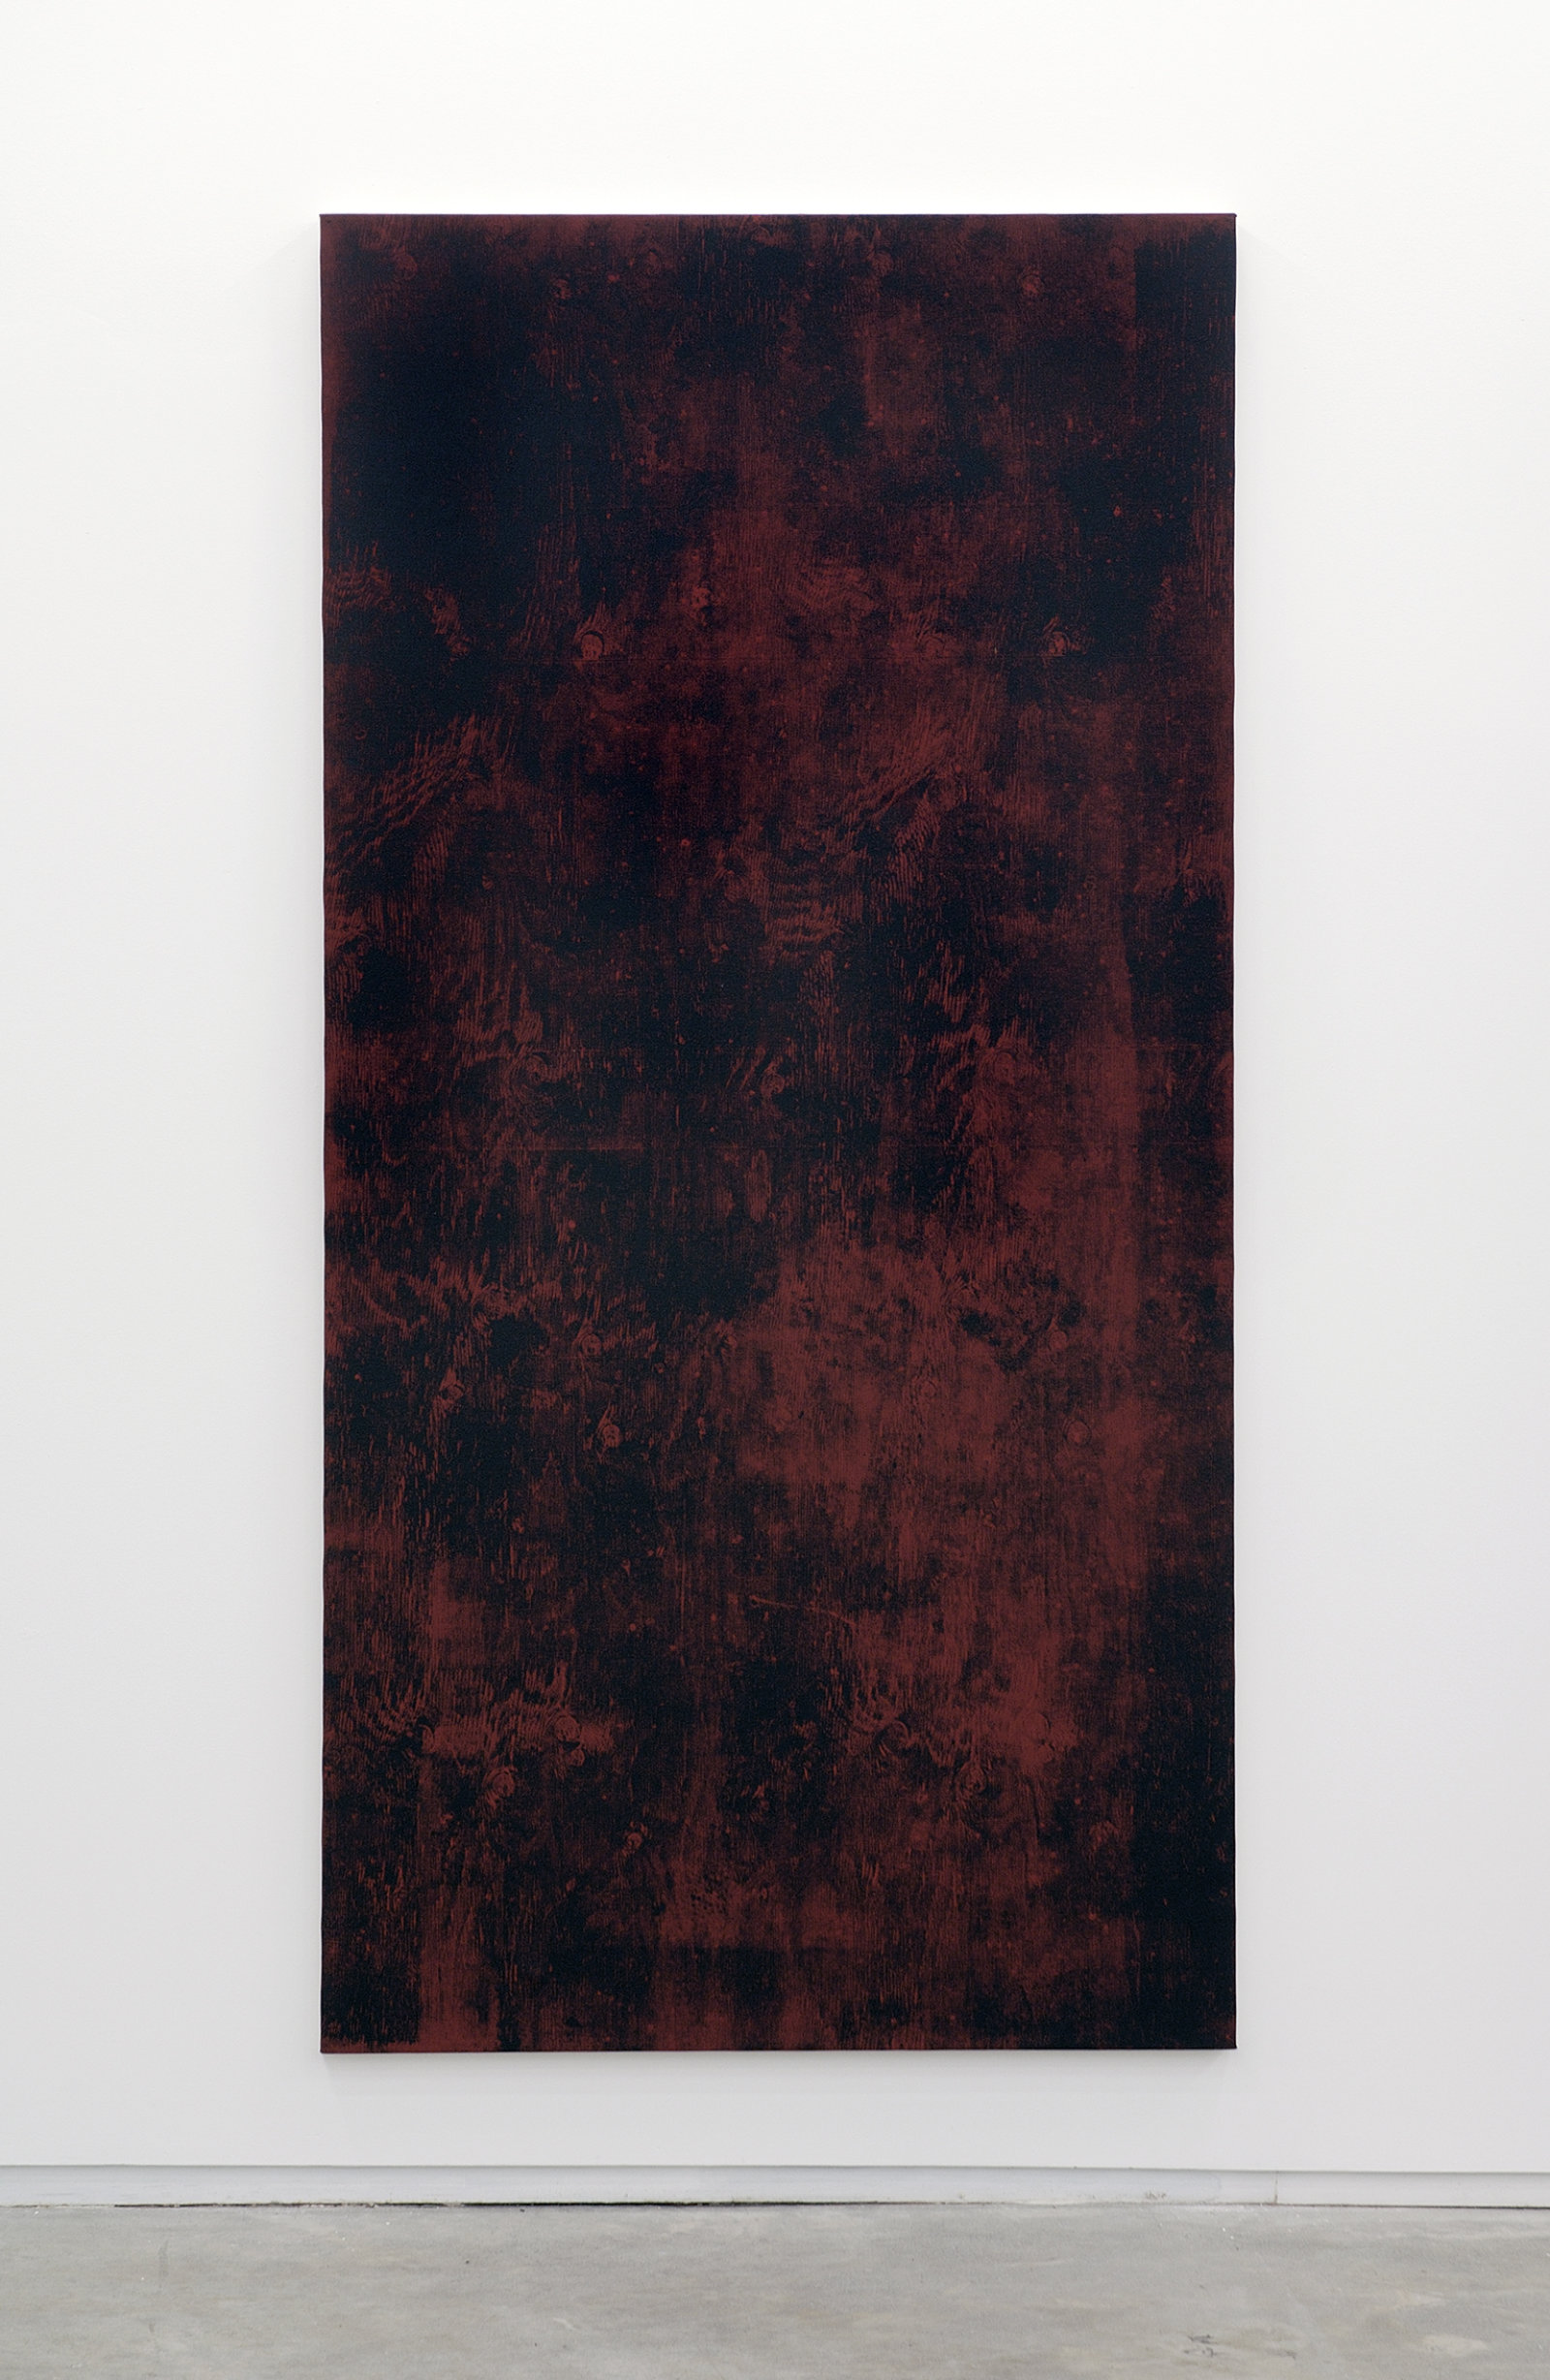 Ian Wallace, Untitled (Monoprint with Burgundy), 1990, acrylic on canvas, 90 x 20 in. (229 x 51 cm)